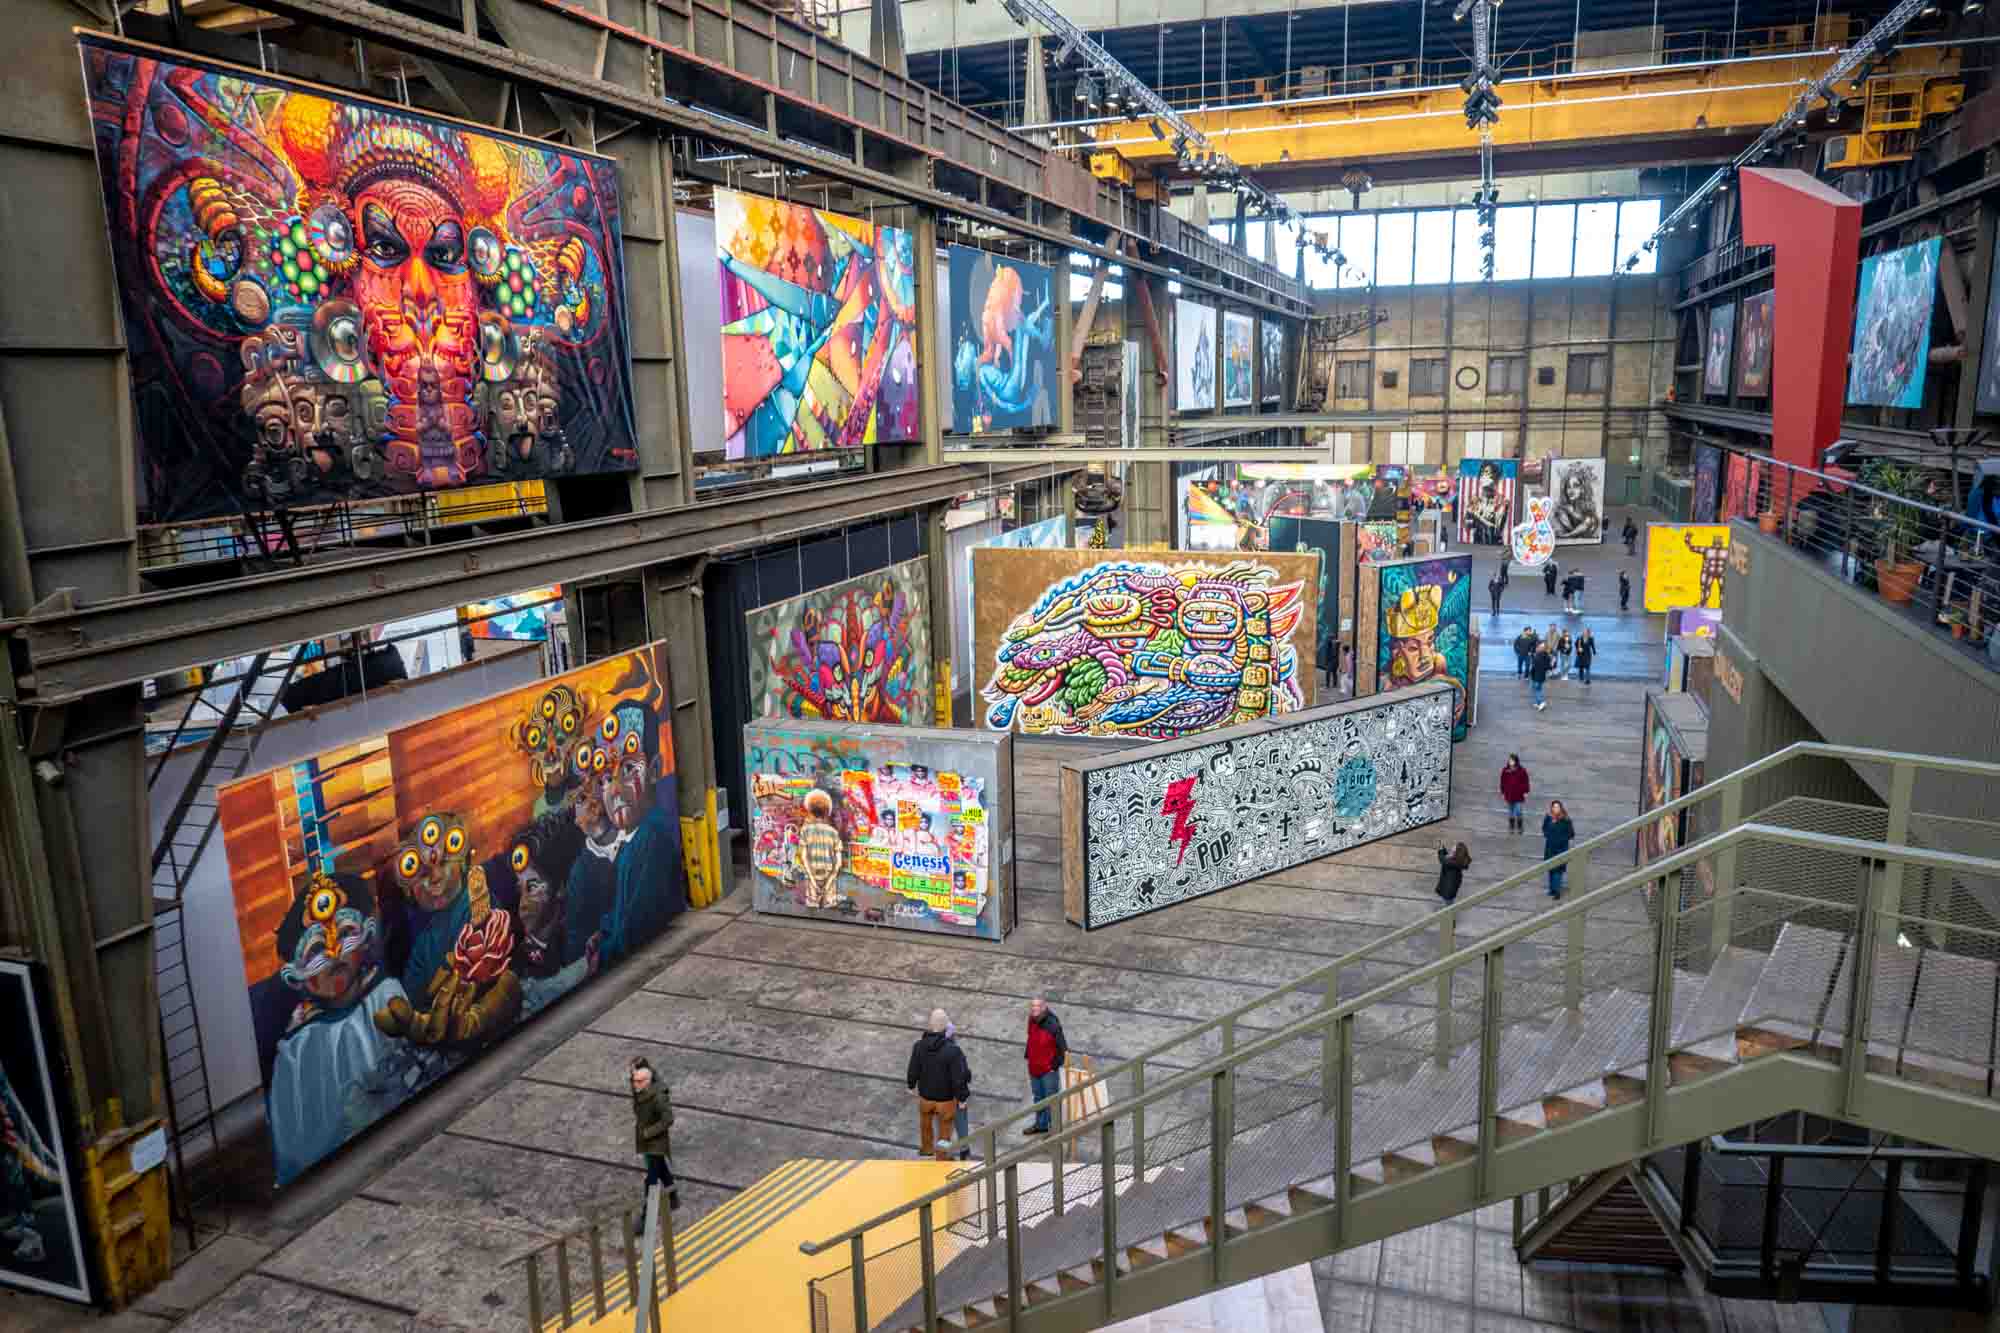 View of numerous large painted murals on canvases inside abandoned factory